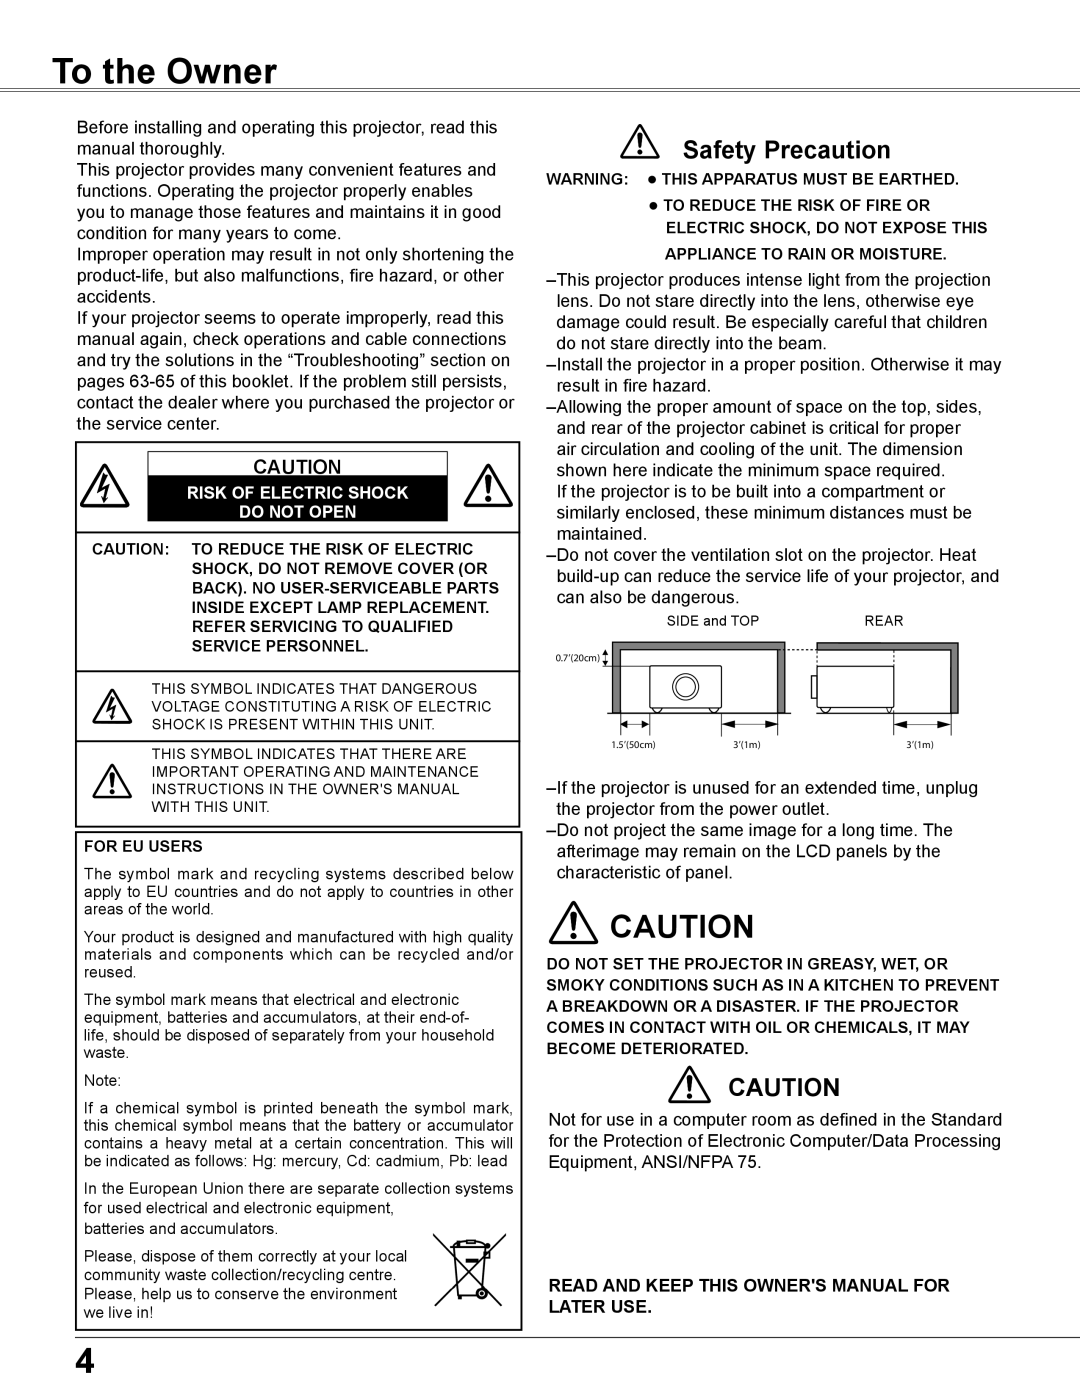 Elmo CRP-26 owner manual To the Owner, Safety Precaution, Risk Of Electric Shock Do Not Open 